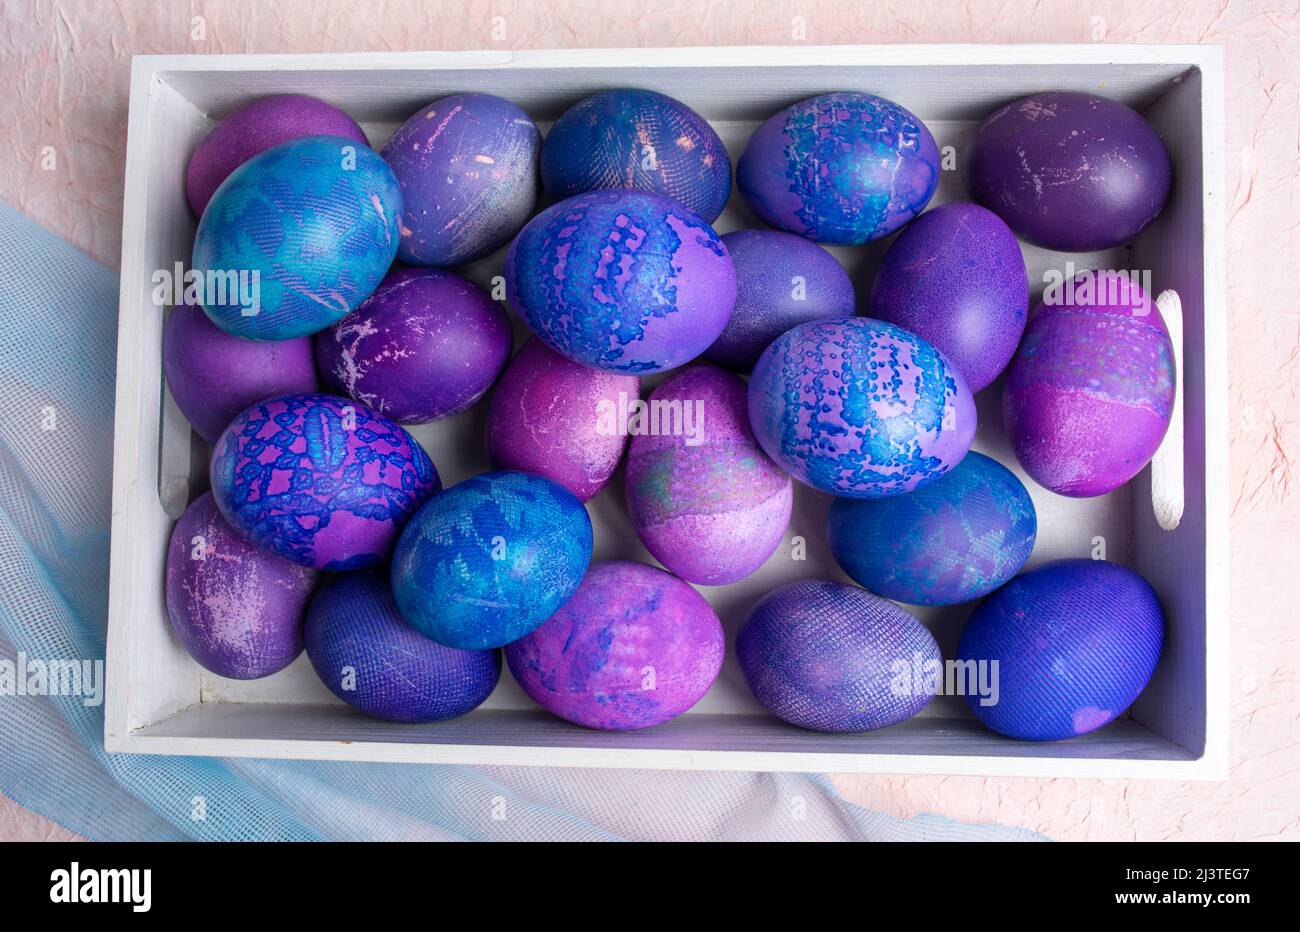 Easter eggs. Blue-purple Easter eggs painted in a lace ,, Top view. Egg background pattern. Stock Photo